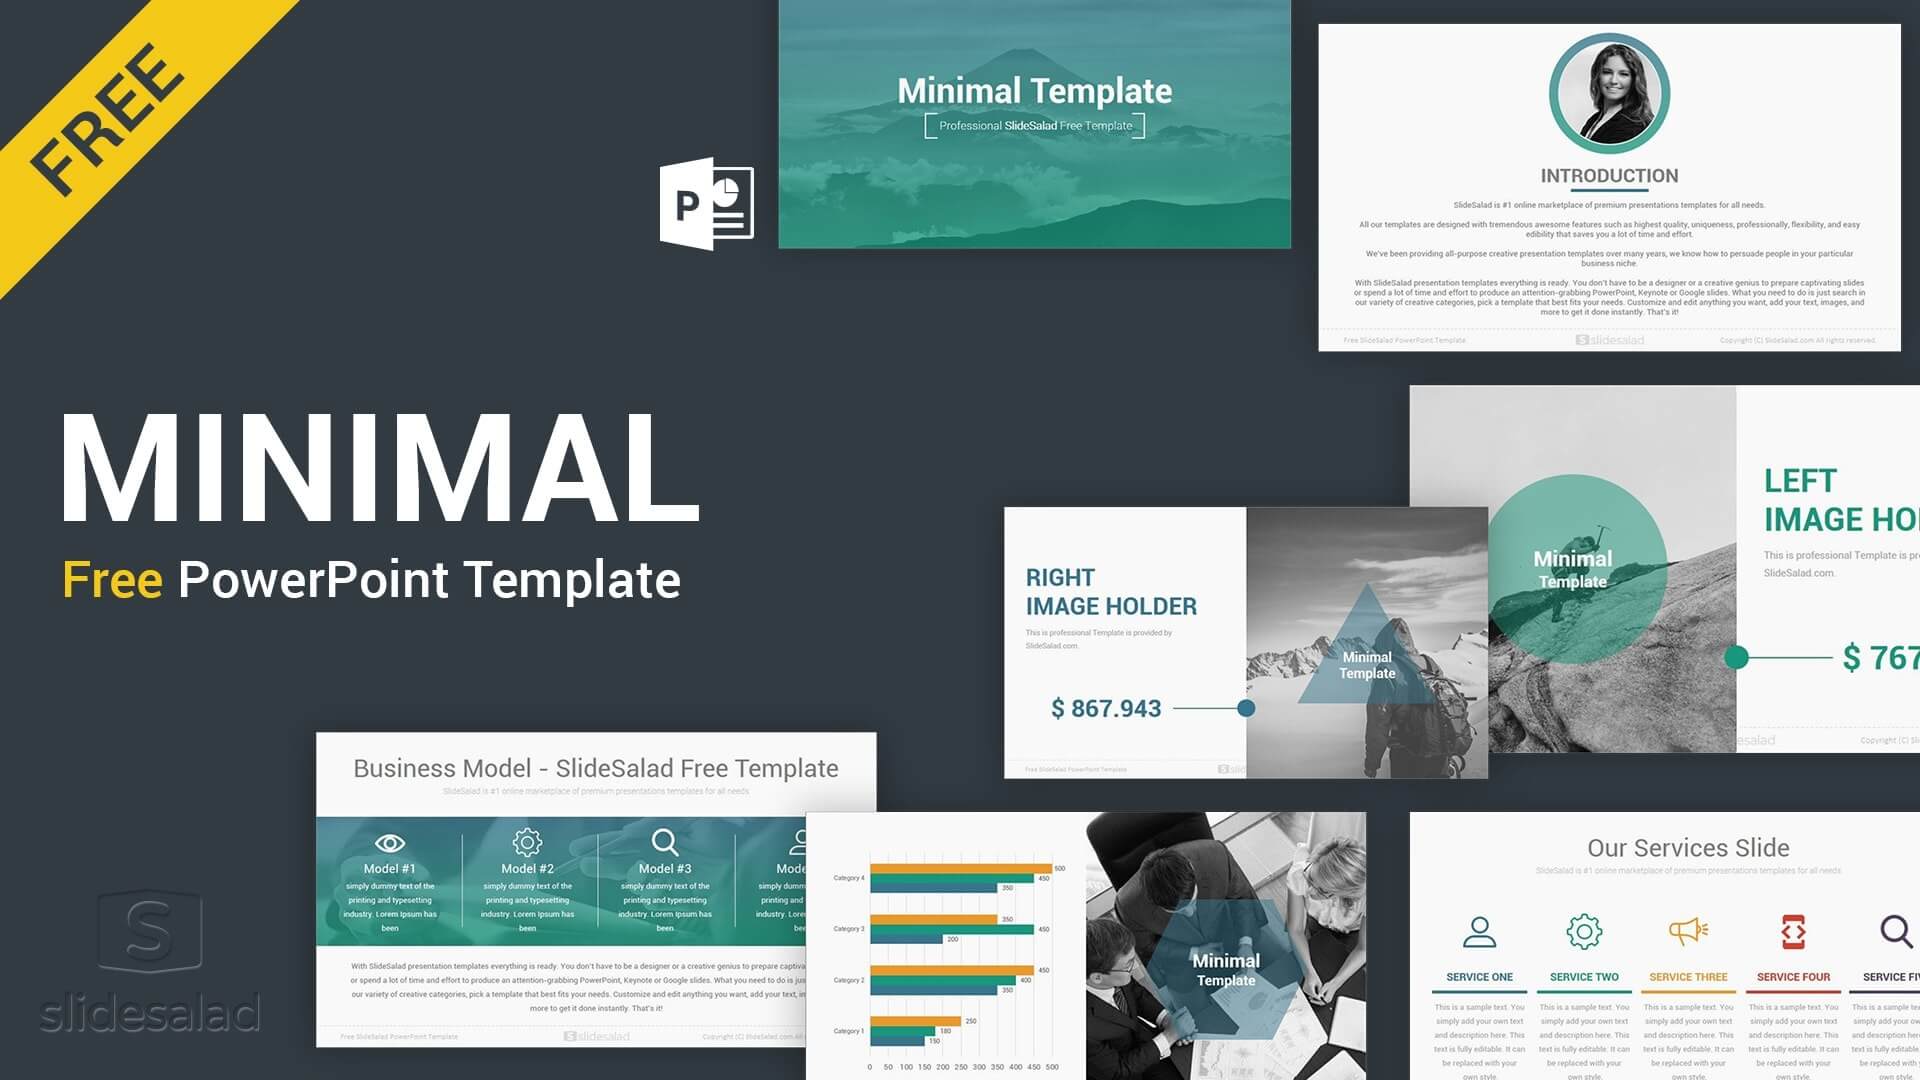 Best Free Presentation Templates Professional Designs 2020 With Regard To Powerpoint Slides Design Templates For Free